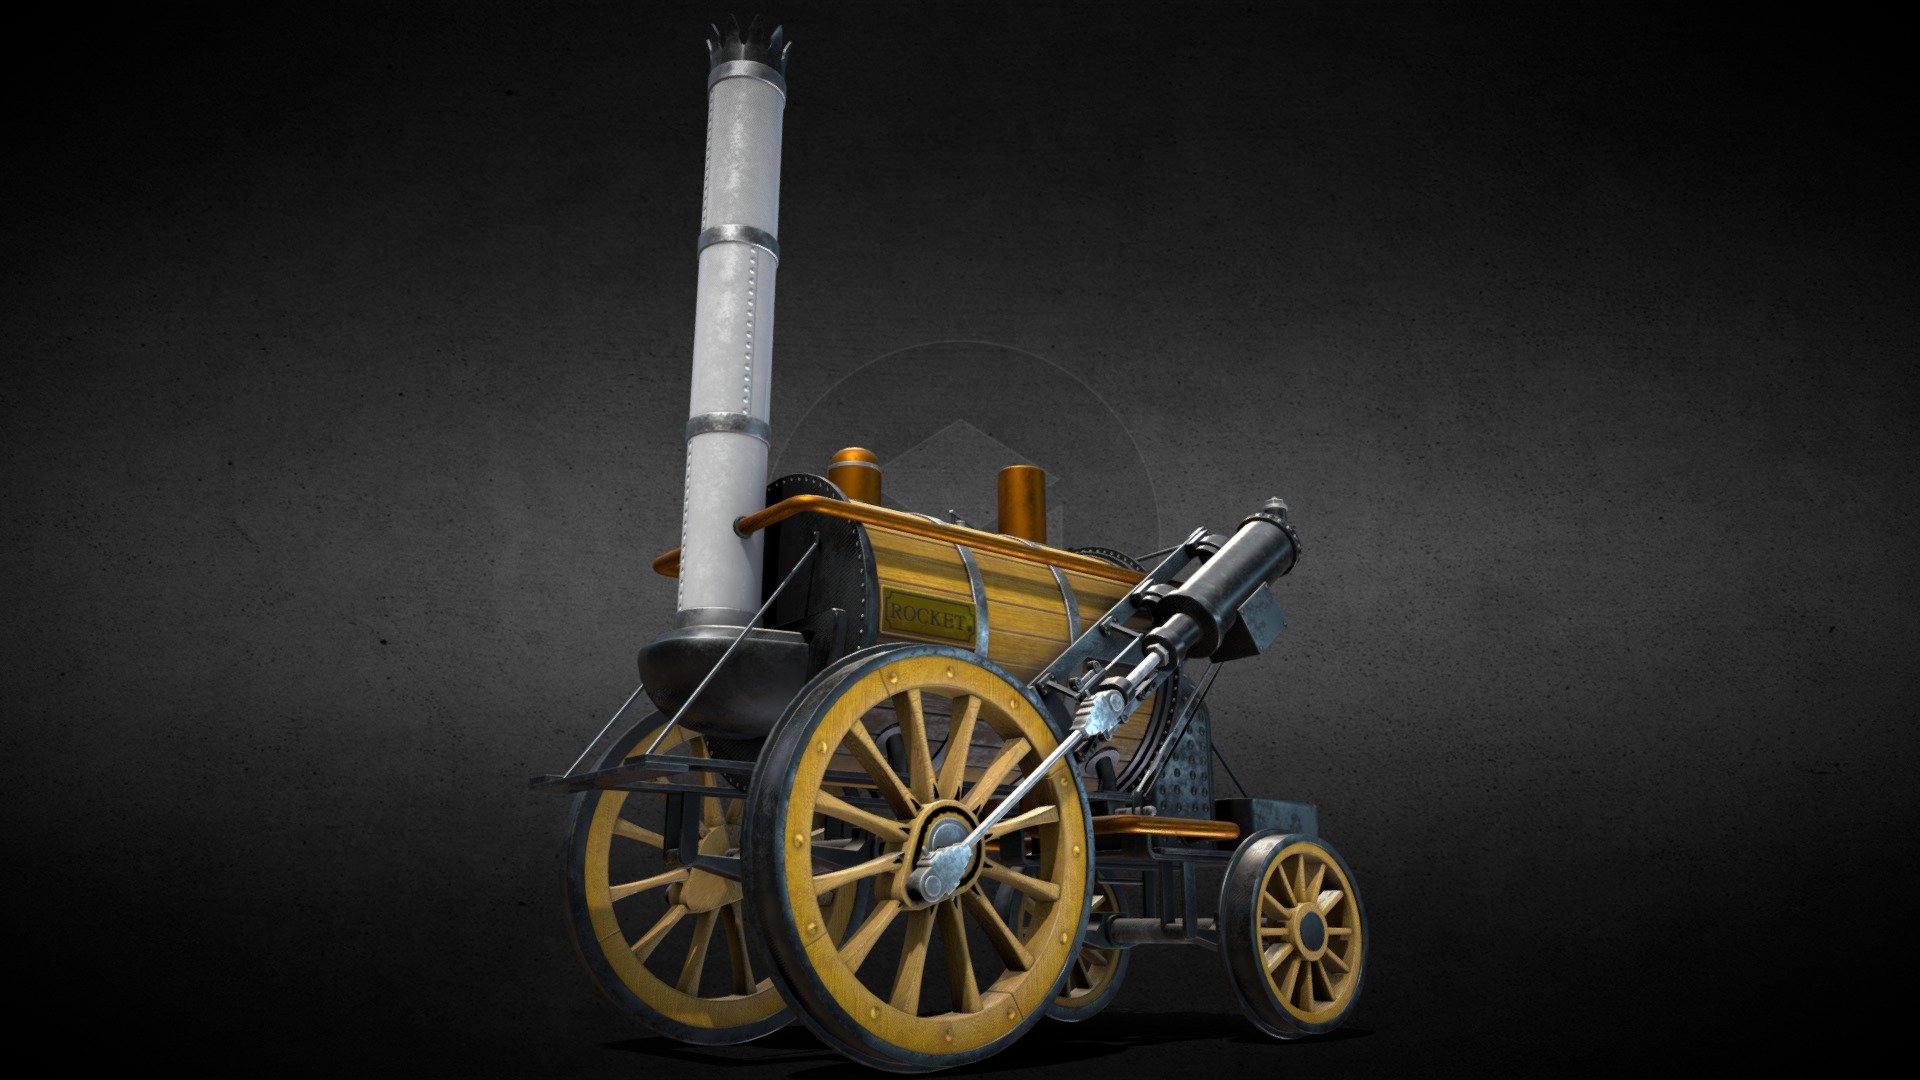 I made this piece as a game ready asset for my portfolio, the model itself is George Stephenson's Rainhill Rocket made in 1829 for the Rainhill Trials. The rocket won and ushered in a new age of locomotive transport 3d model